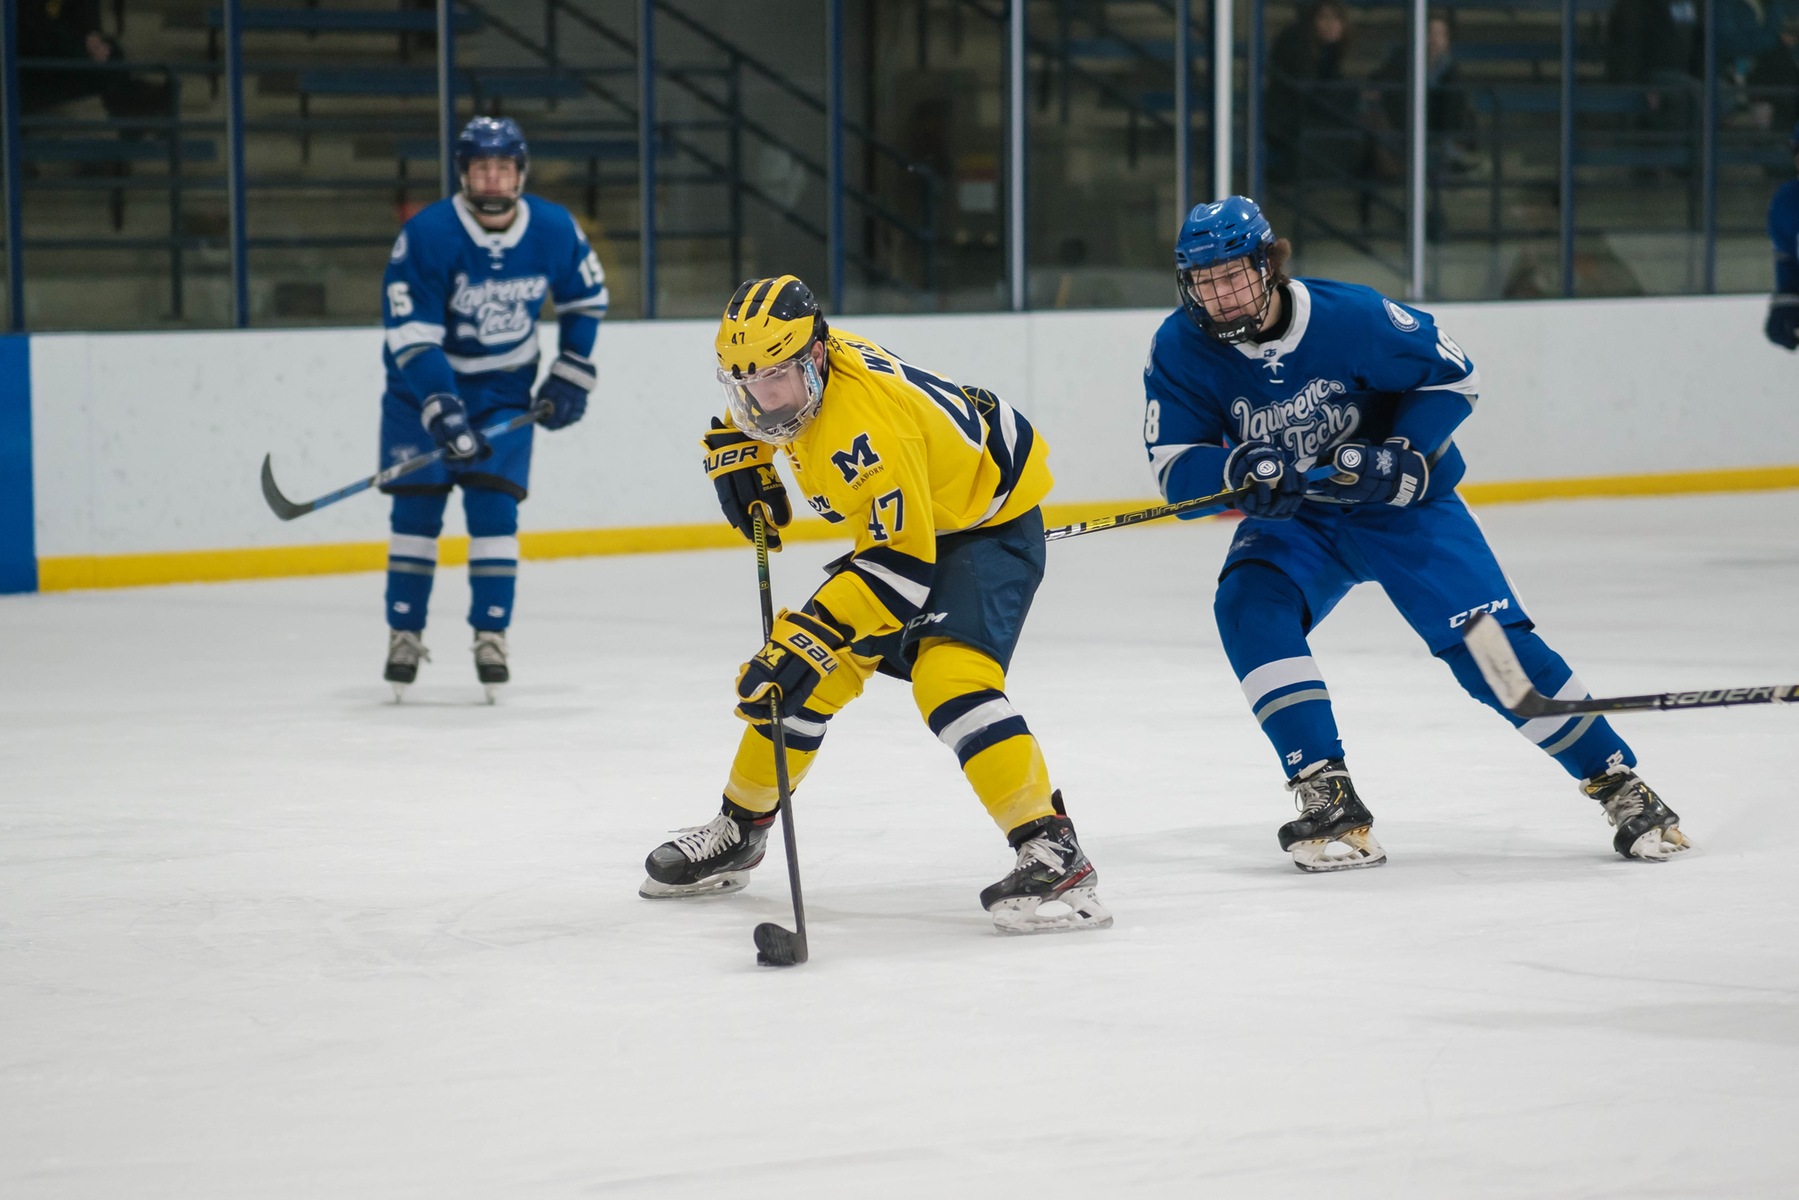 Wolverines fall in rematch against Lakers, 3-1